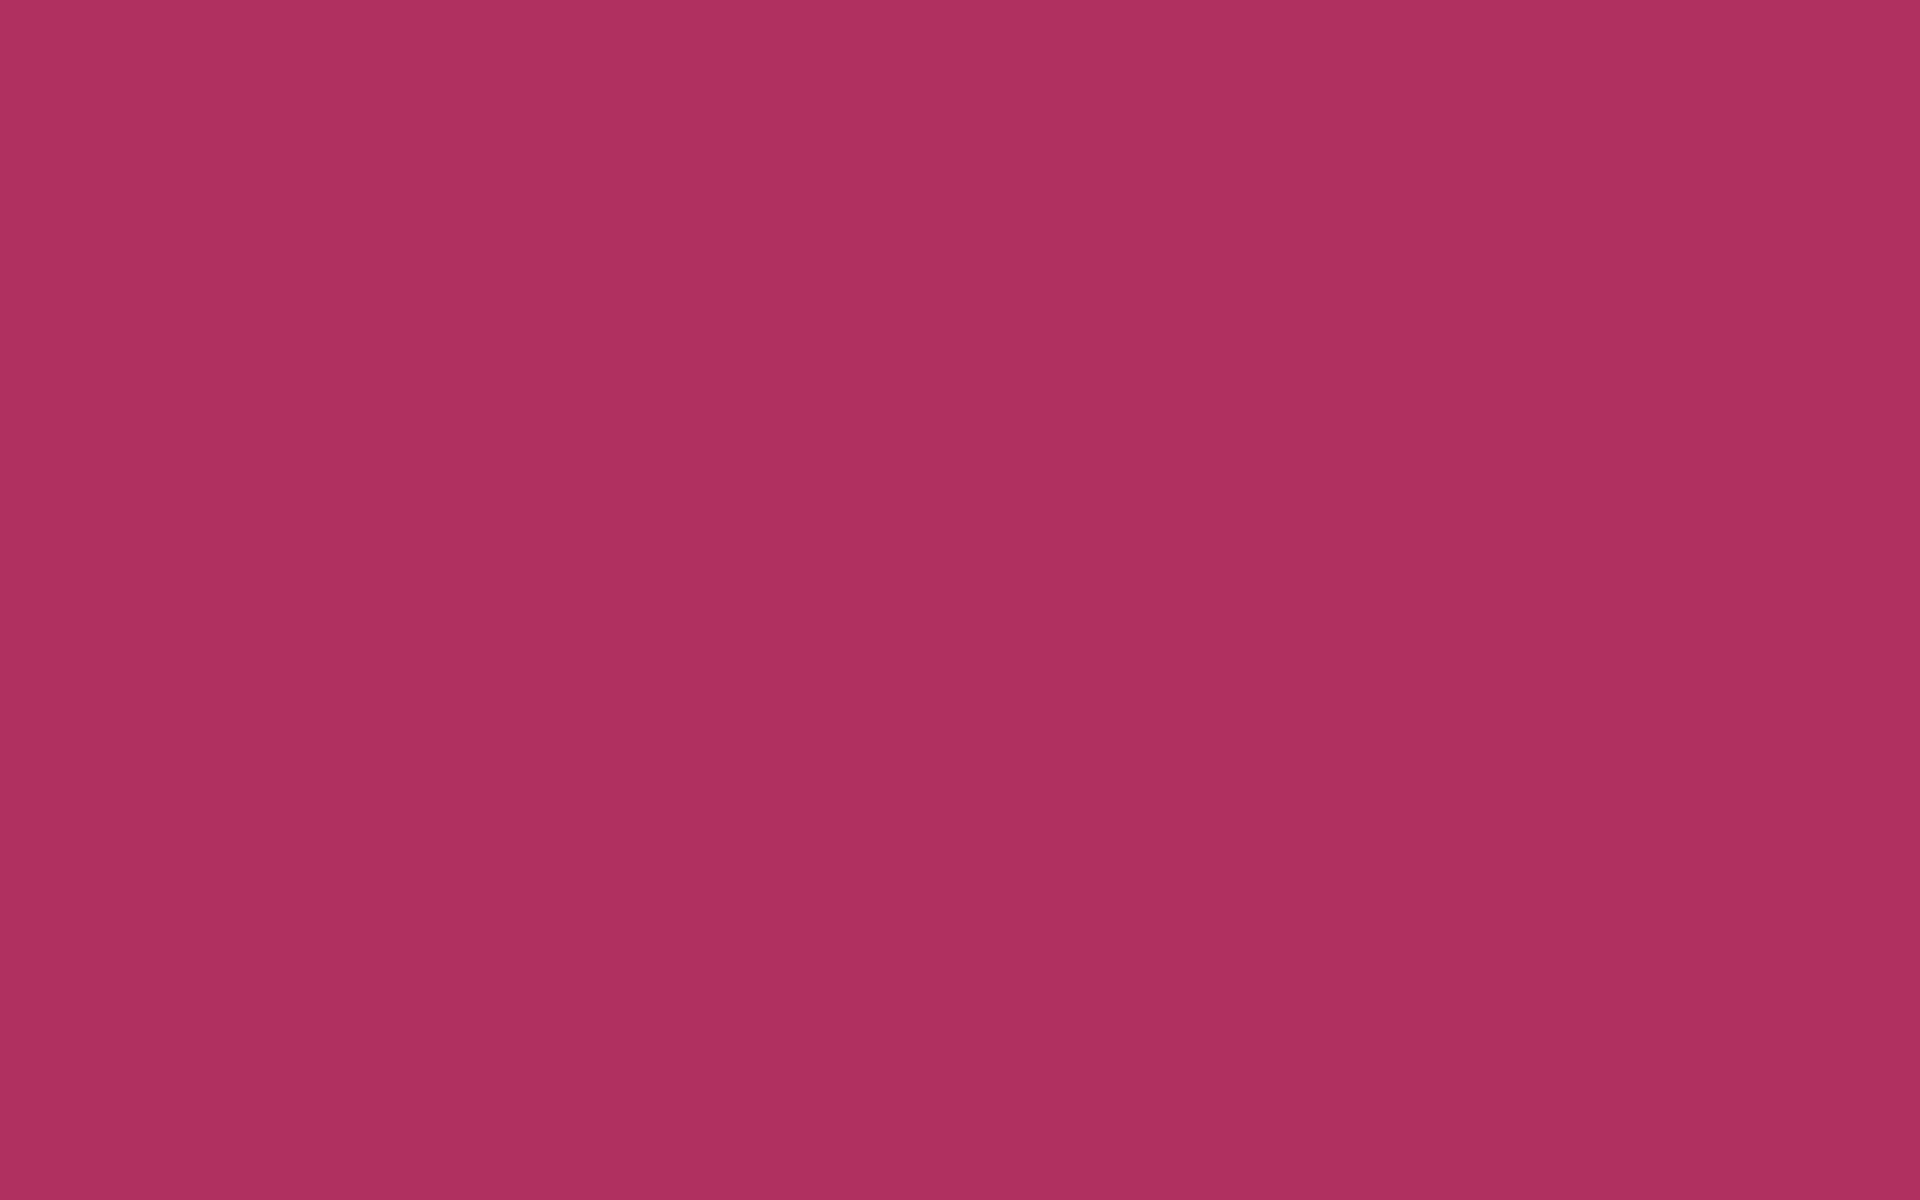  1920x1200 resolution Rich Maroon solid color background view and